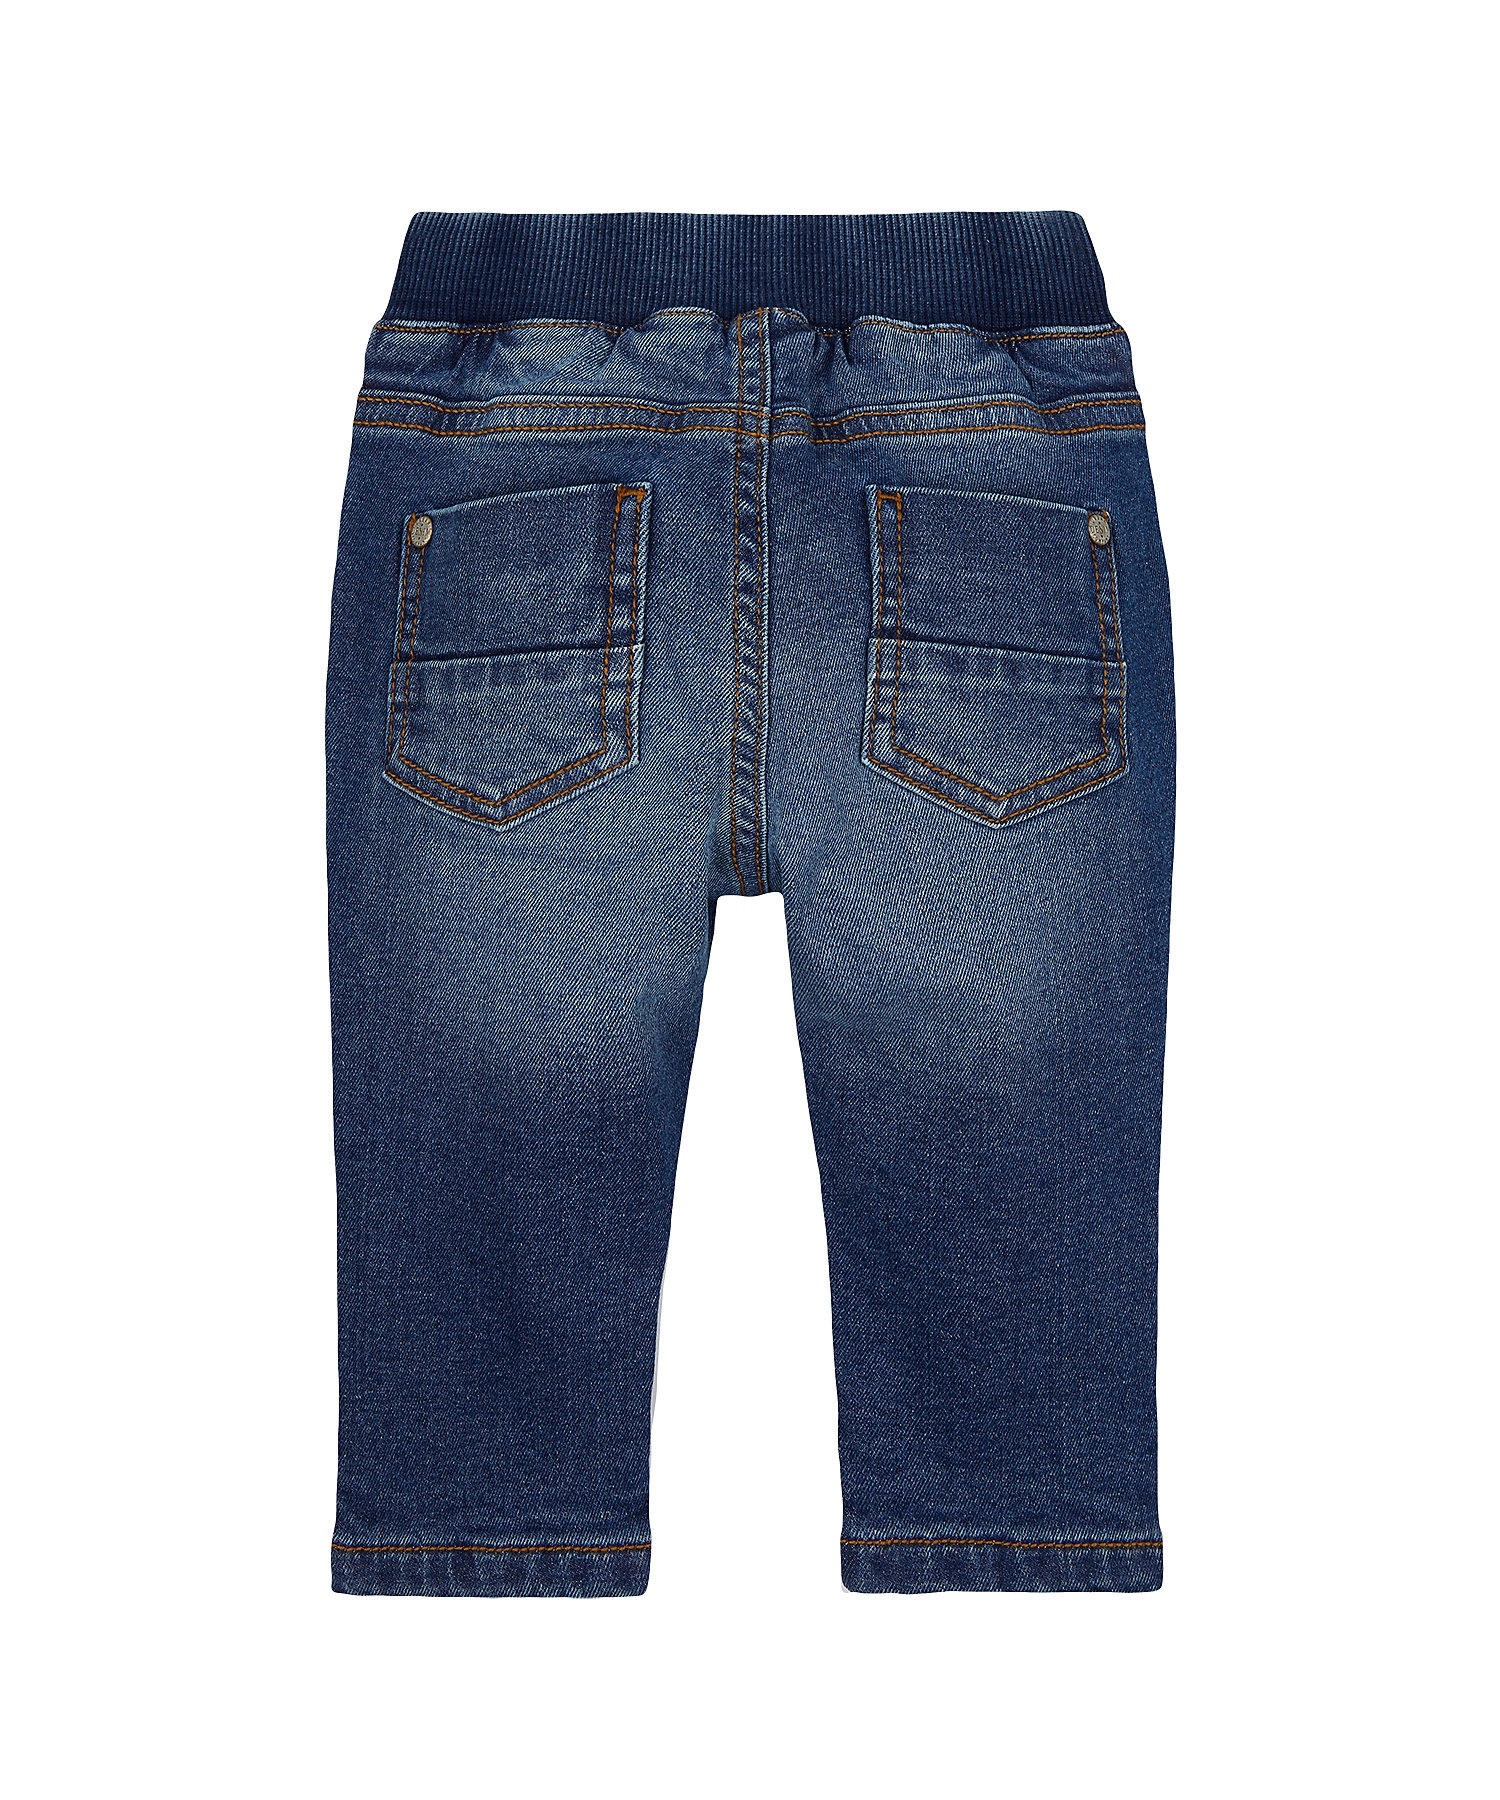 Boys Mid-Wash Jeans Jersey Lined - Blue